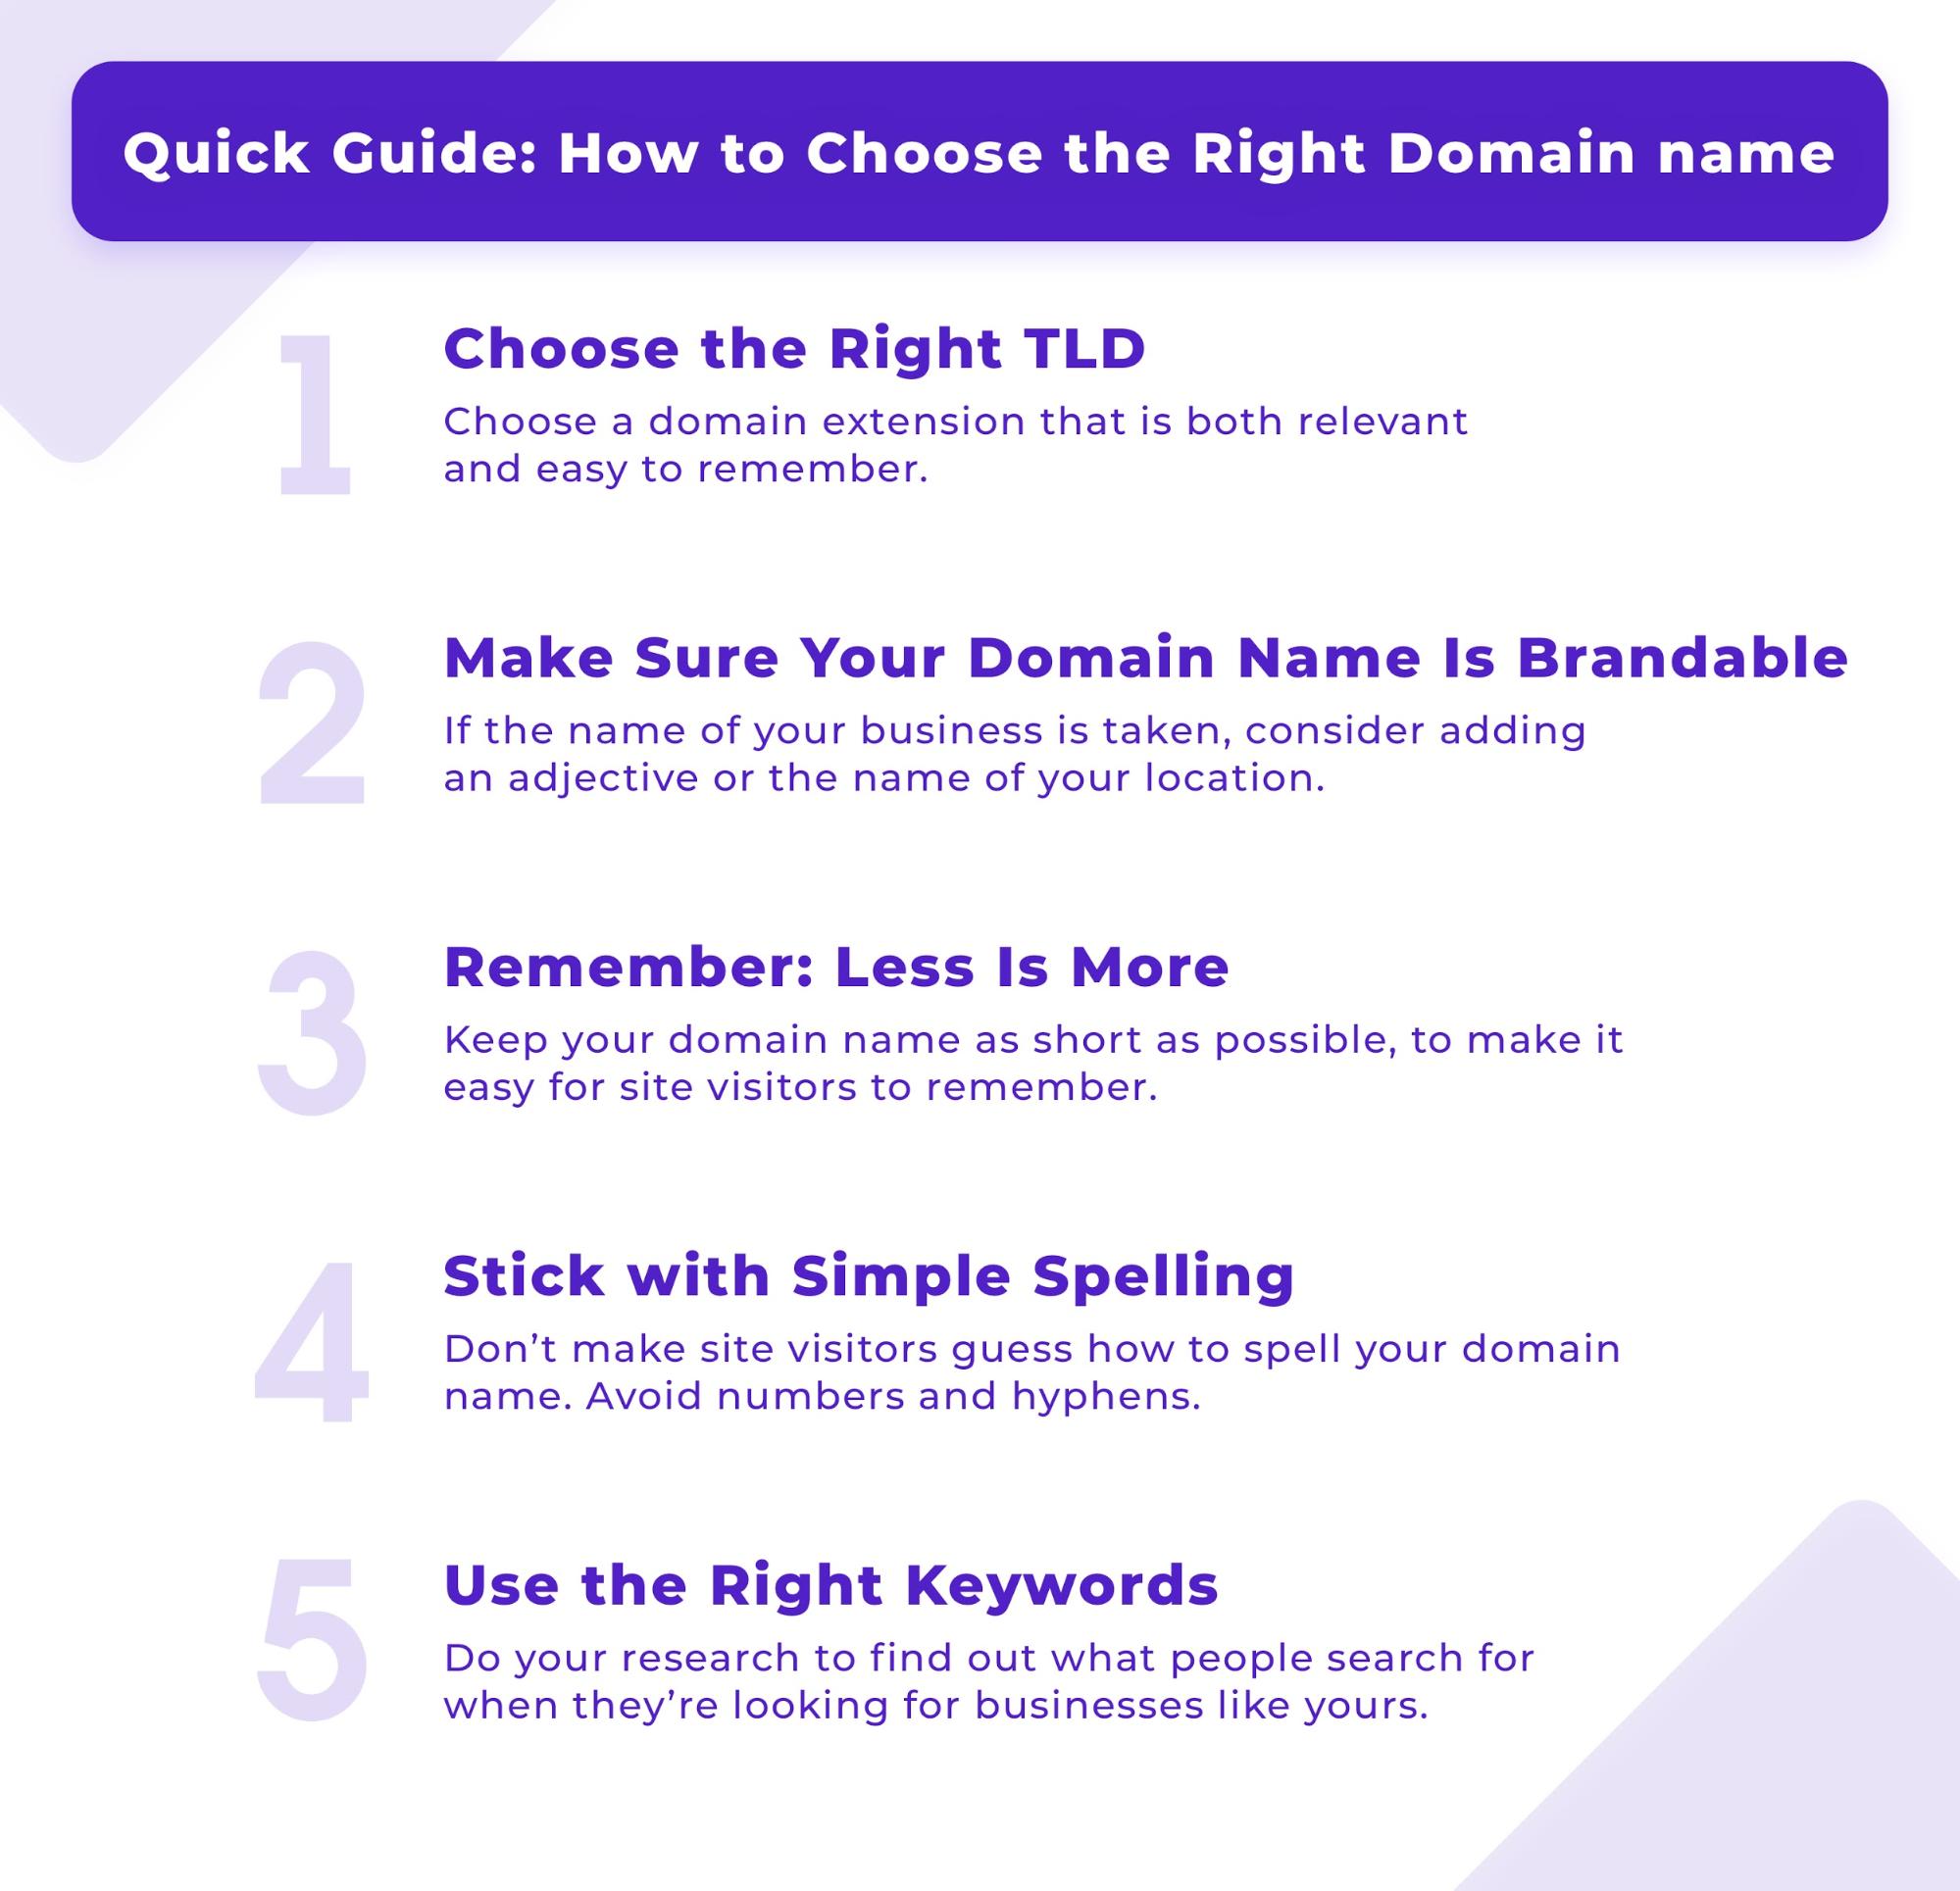 Quick Guide - How to Choose a Domain Name